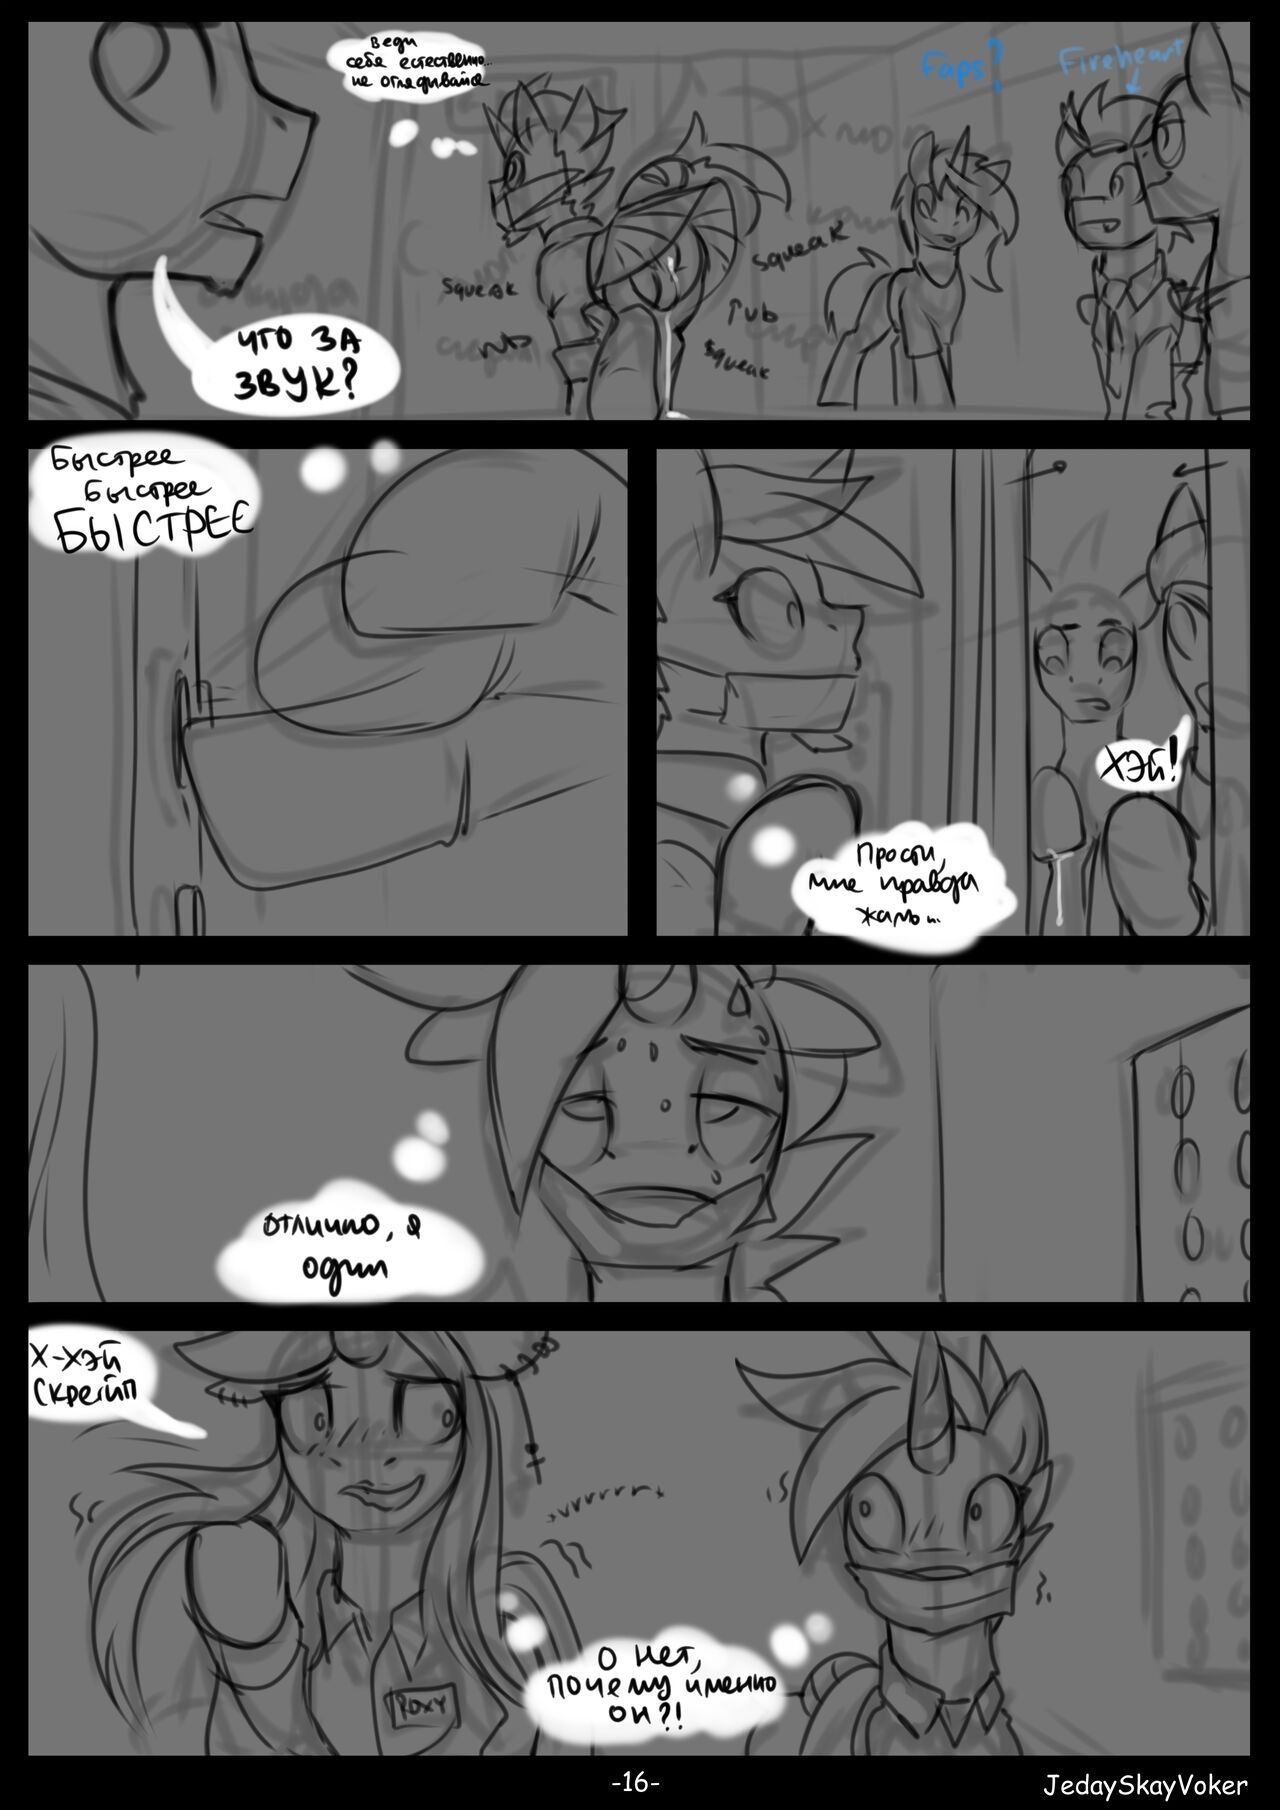 [JedaySkayVoker] Play the Record, ch. 1-3 (My Little Pony: Friendship is Magic) [+Sketches][Ongoing][Russian] 39